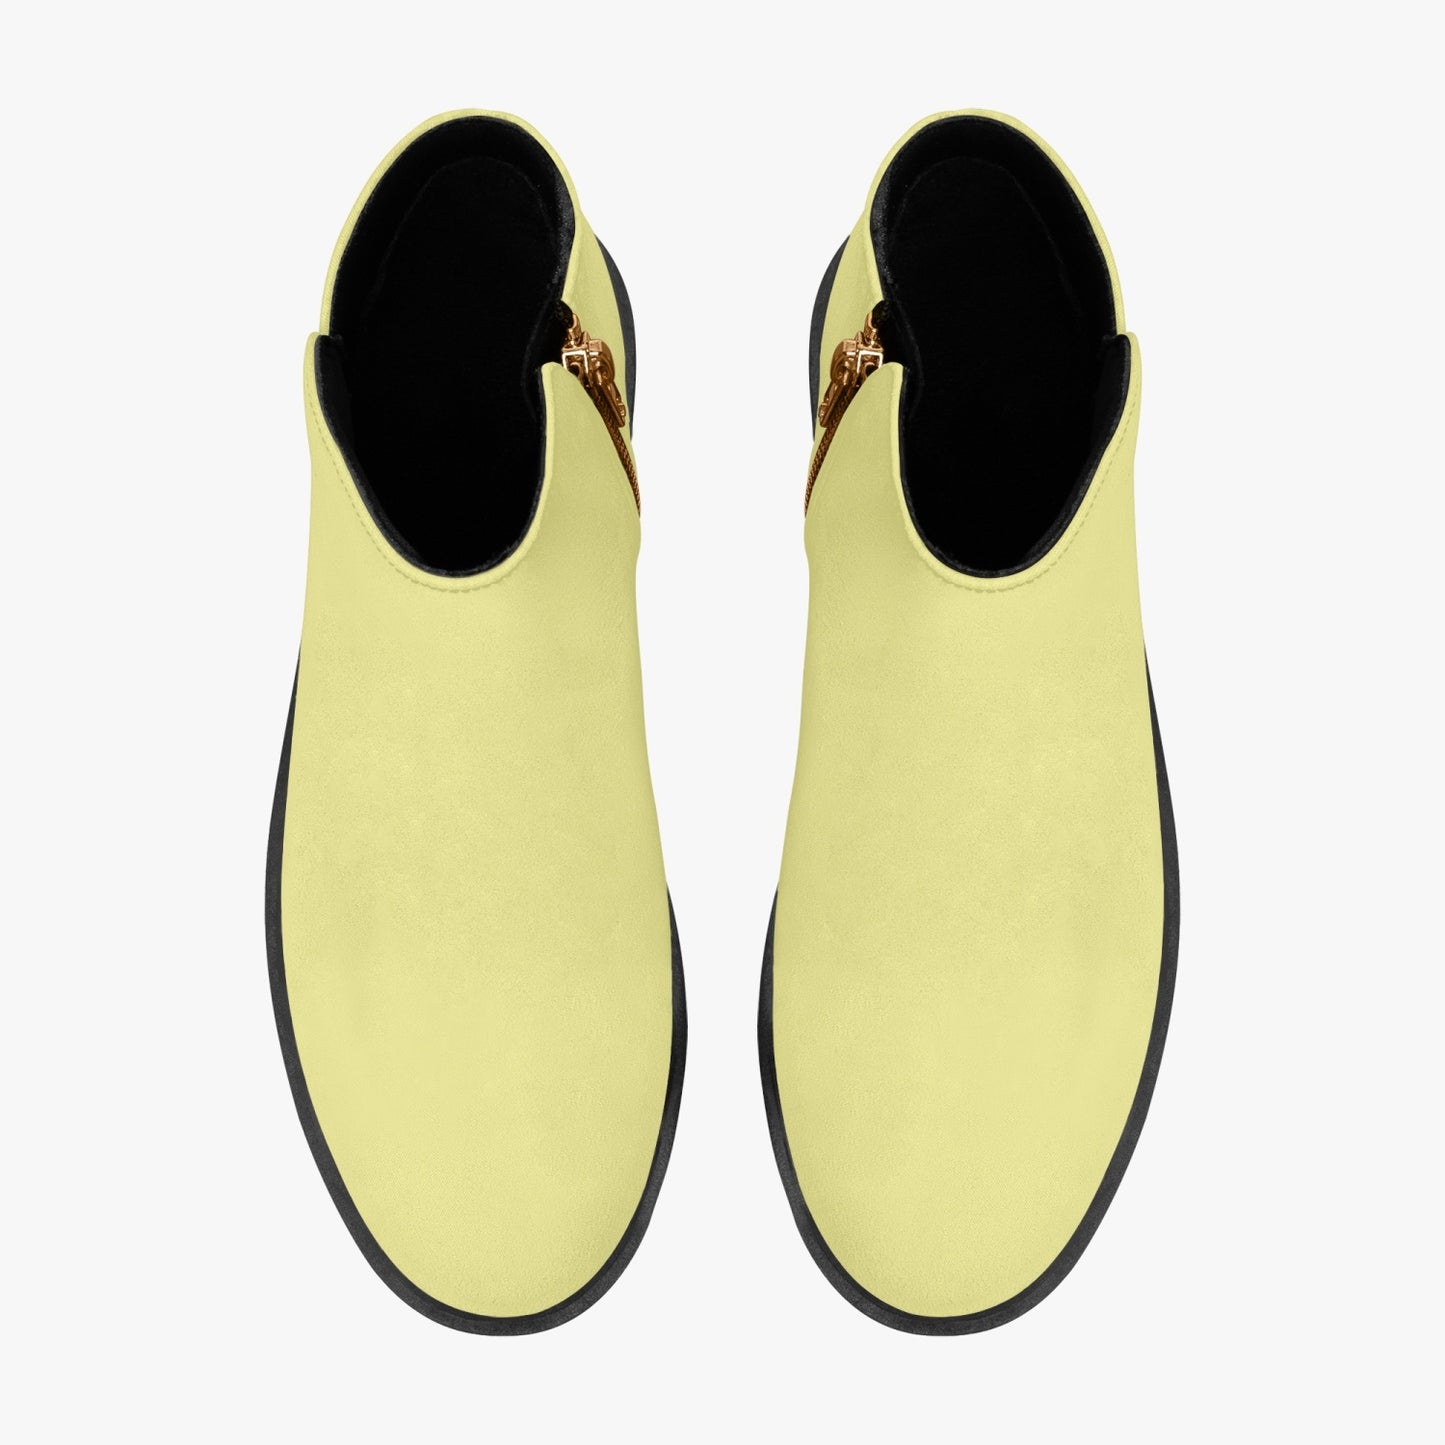 Pastel Yellow Zipper Unisex Suede Ankle Boots